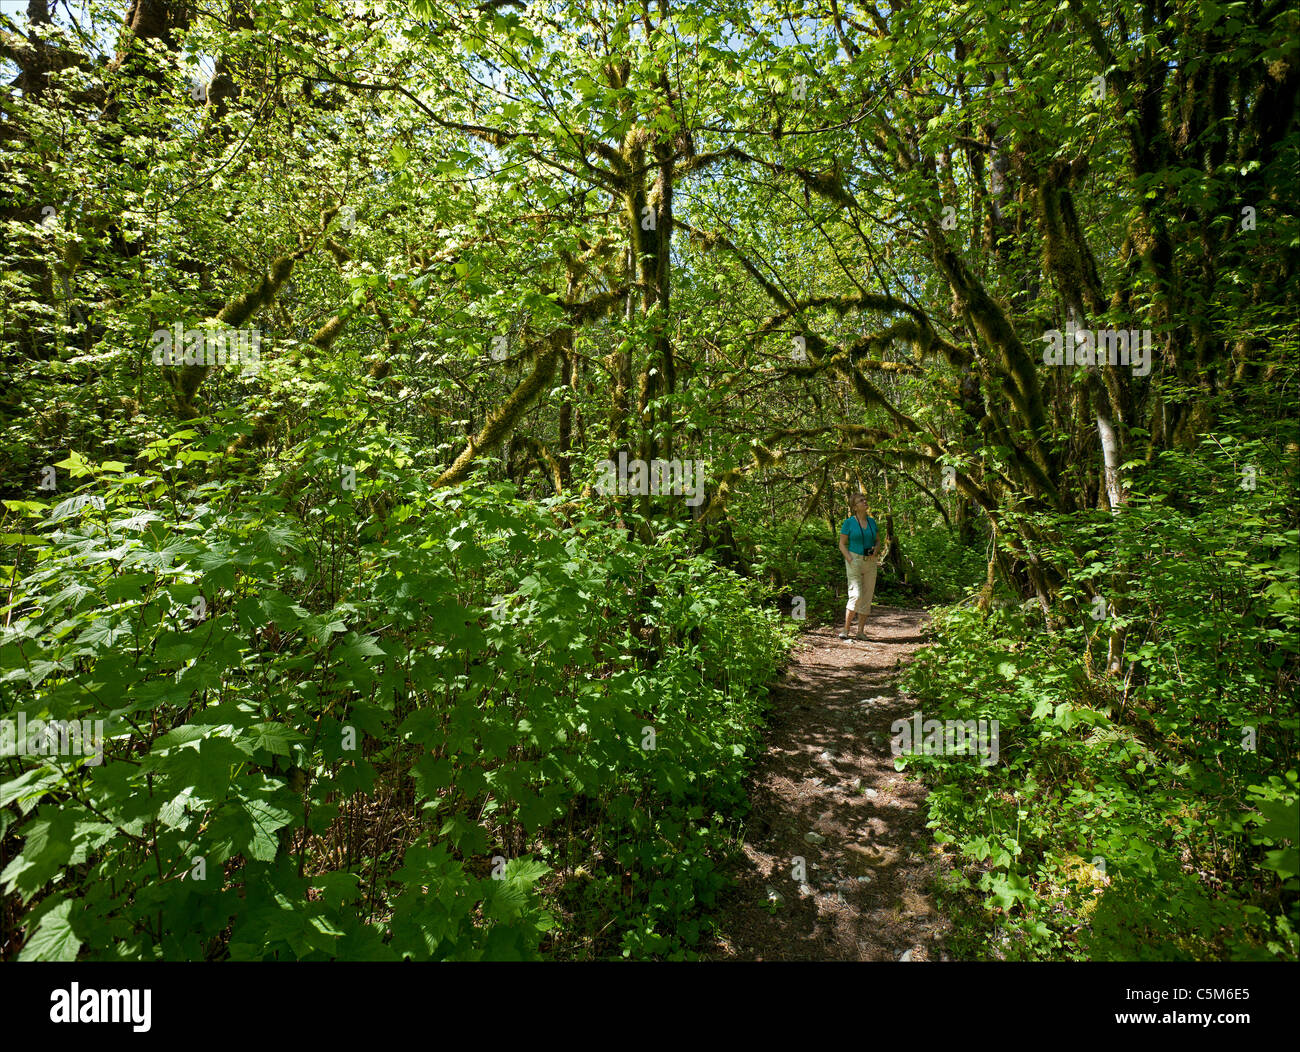 Virgin rain forest with path Stock Photo